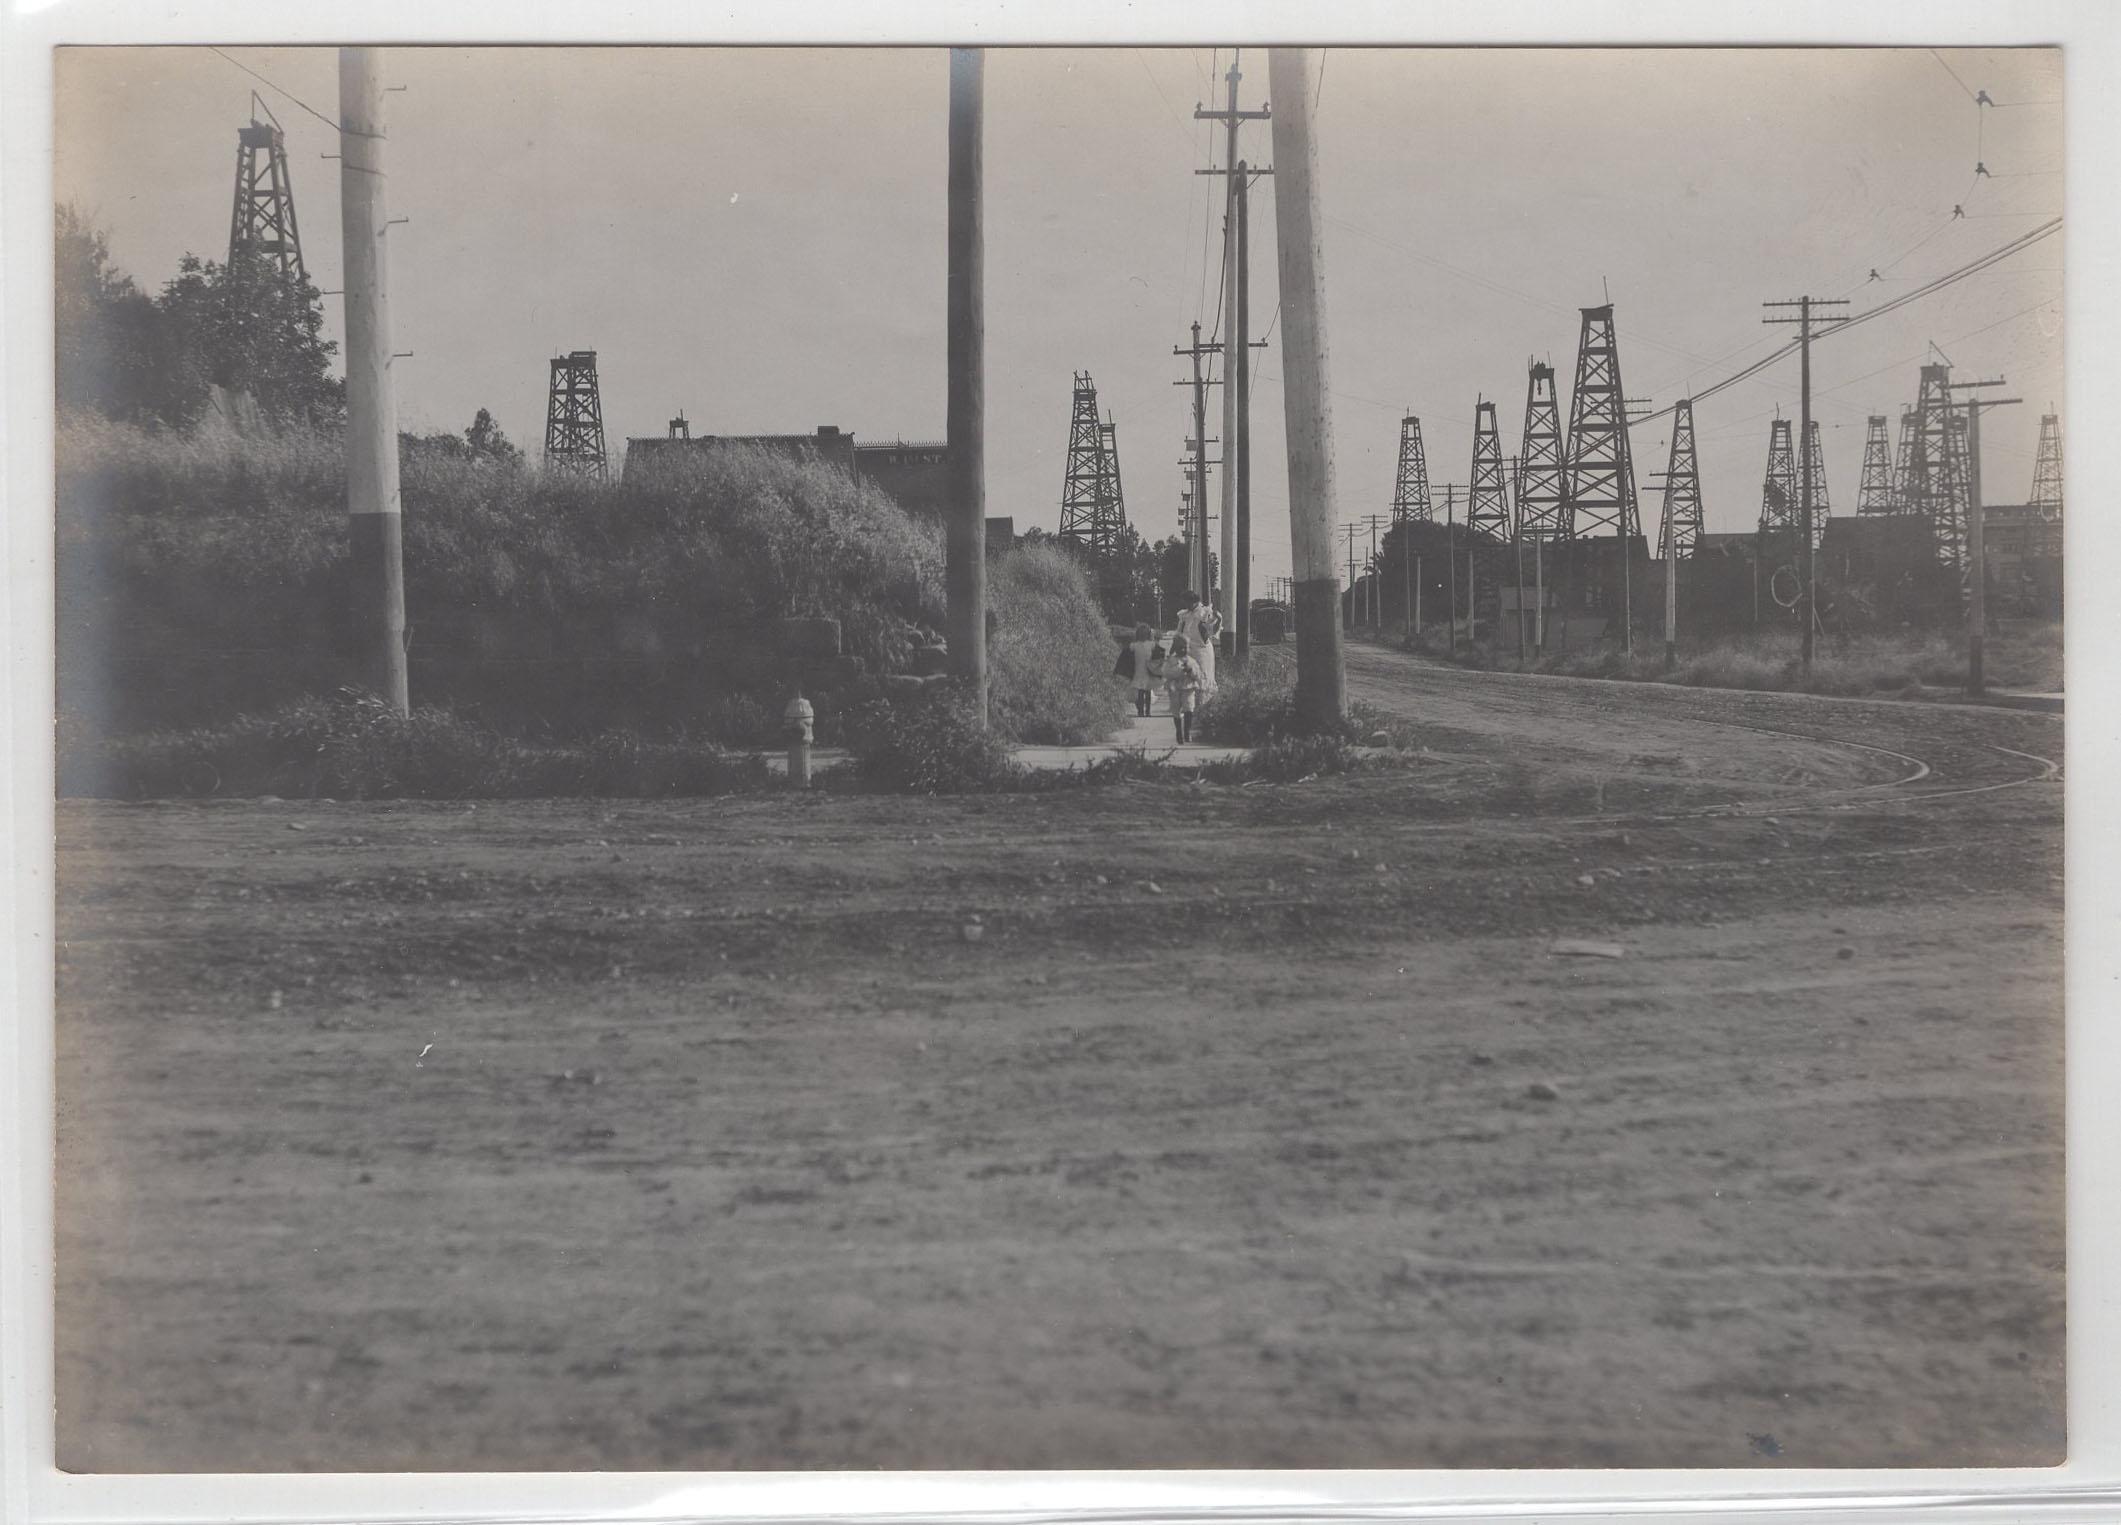 Family with oil wells, LA